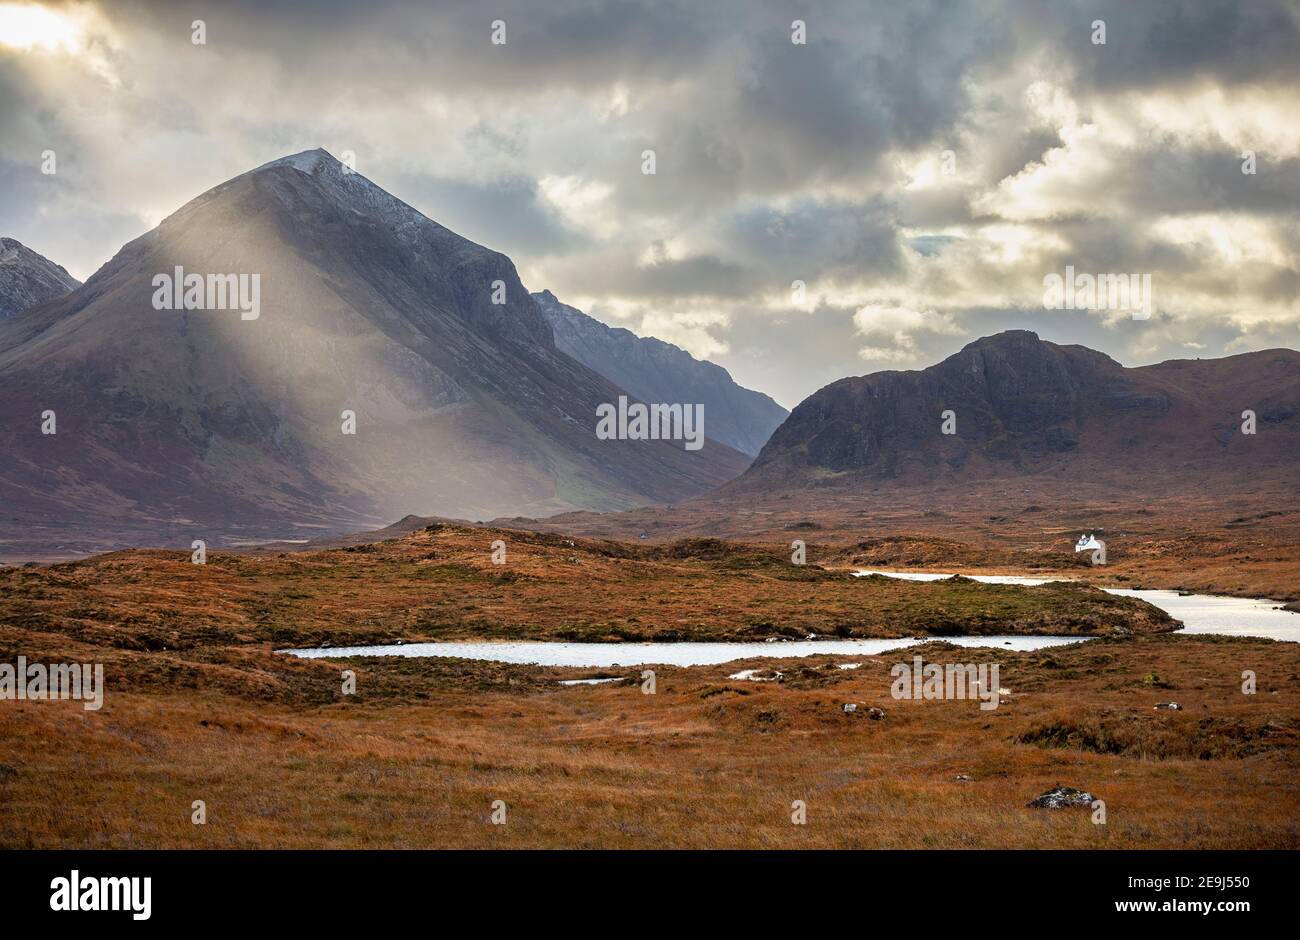 Isle of Skye, Scotland: Shaft of sun sweeps across Glamaig Mountain with the River Sligachan in the foreground. Stock Photo